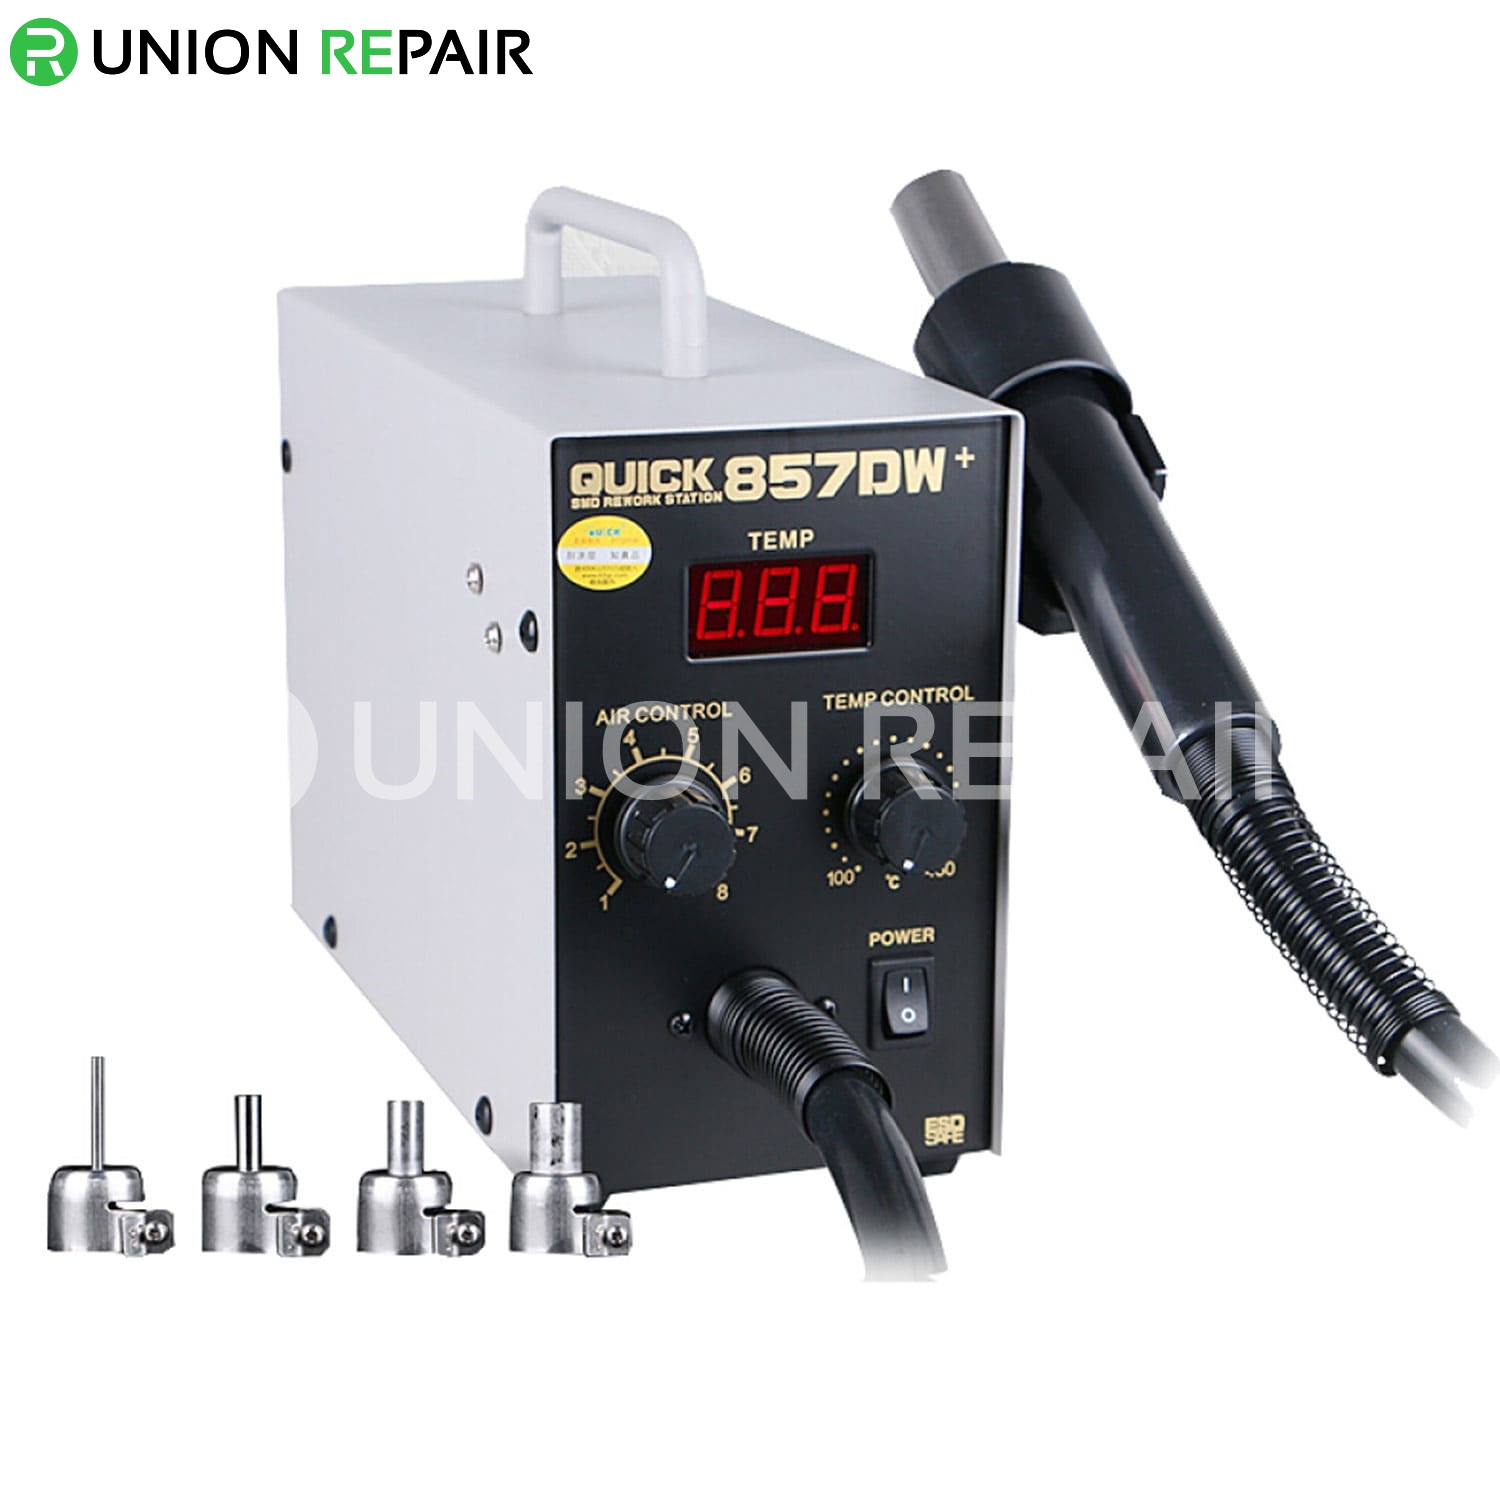 QUICK 857DW+ Lead Free Adjustable Hot Air Heat Gun With Helical Wind Rework  Soldering Station